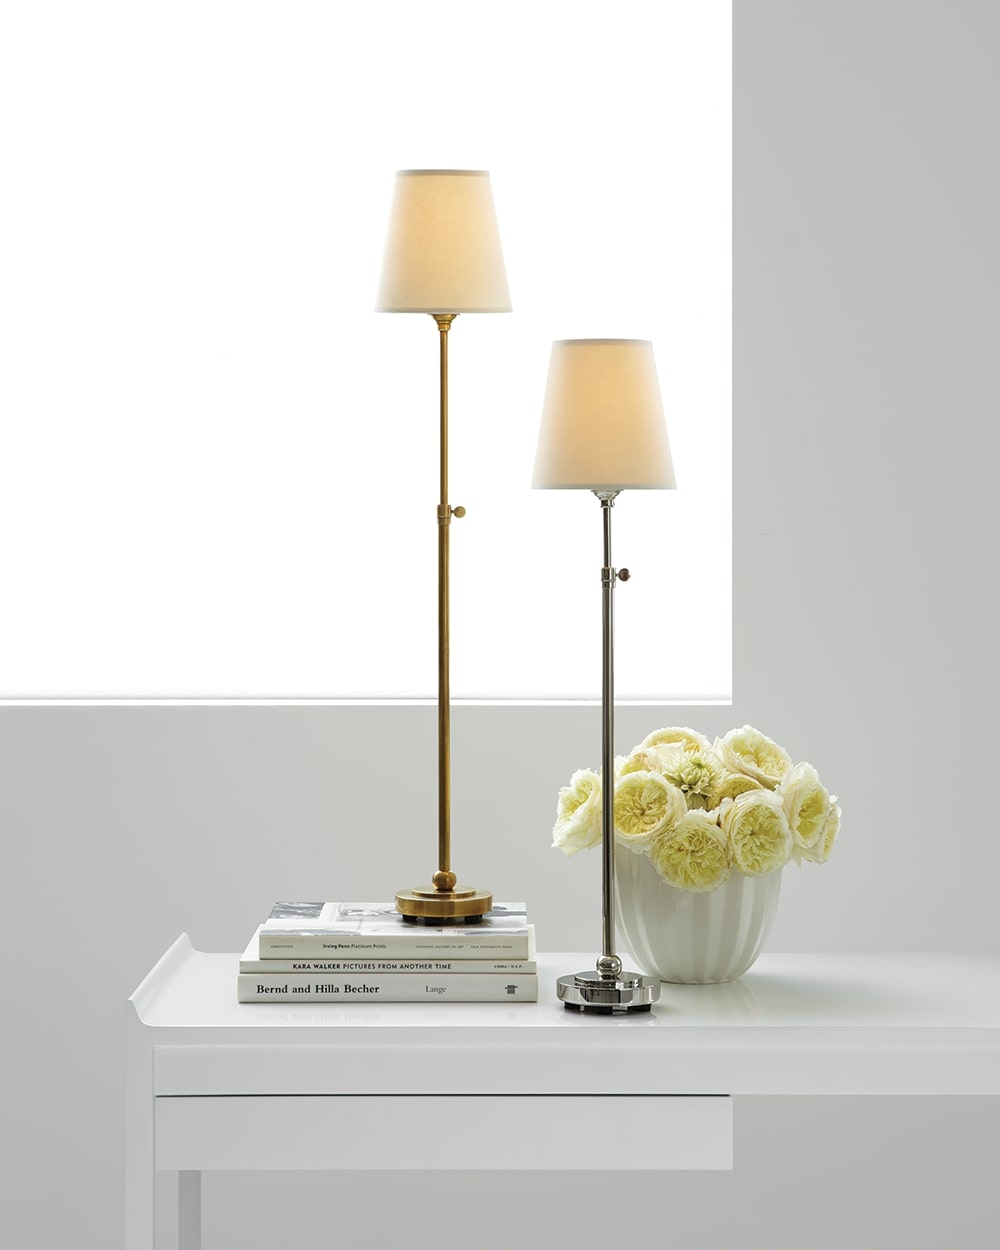 Hand-Rubbed Antique Brass and Natural Paper | Bryant Table Lamp | Valley Ridge Furniture